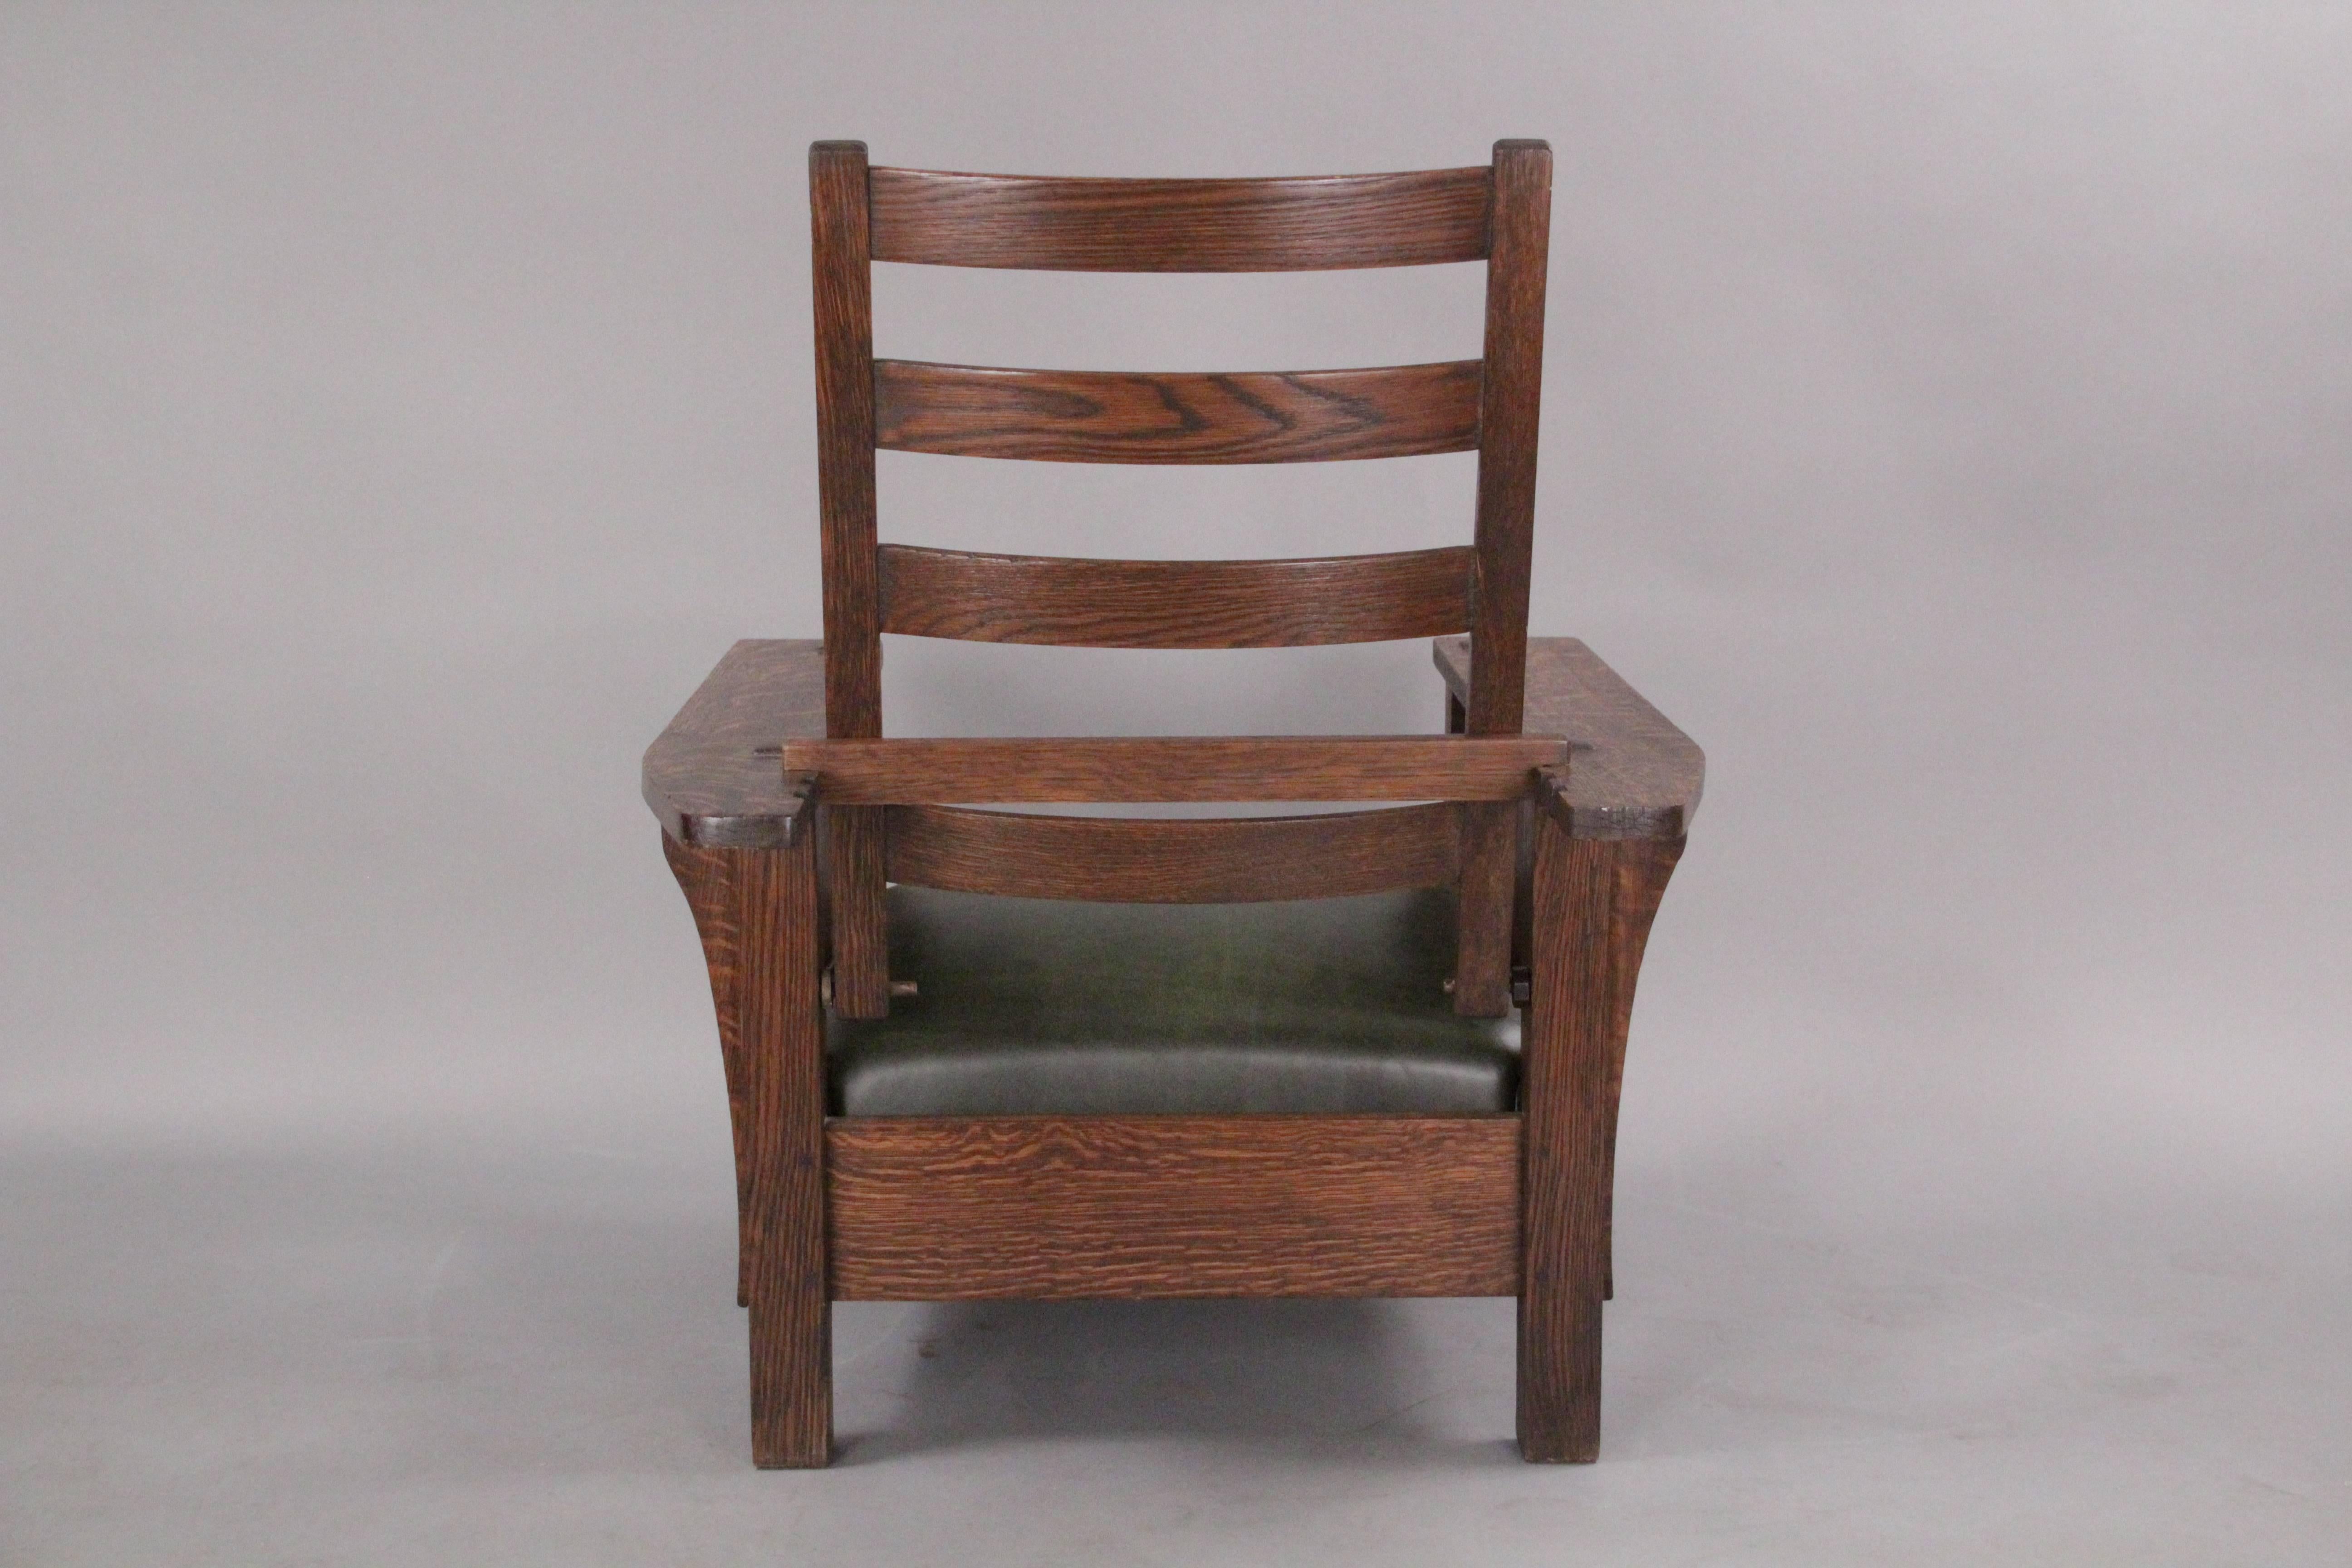 North American Large-Scale Arts and Crafts Morris Chair, circa 1910